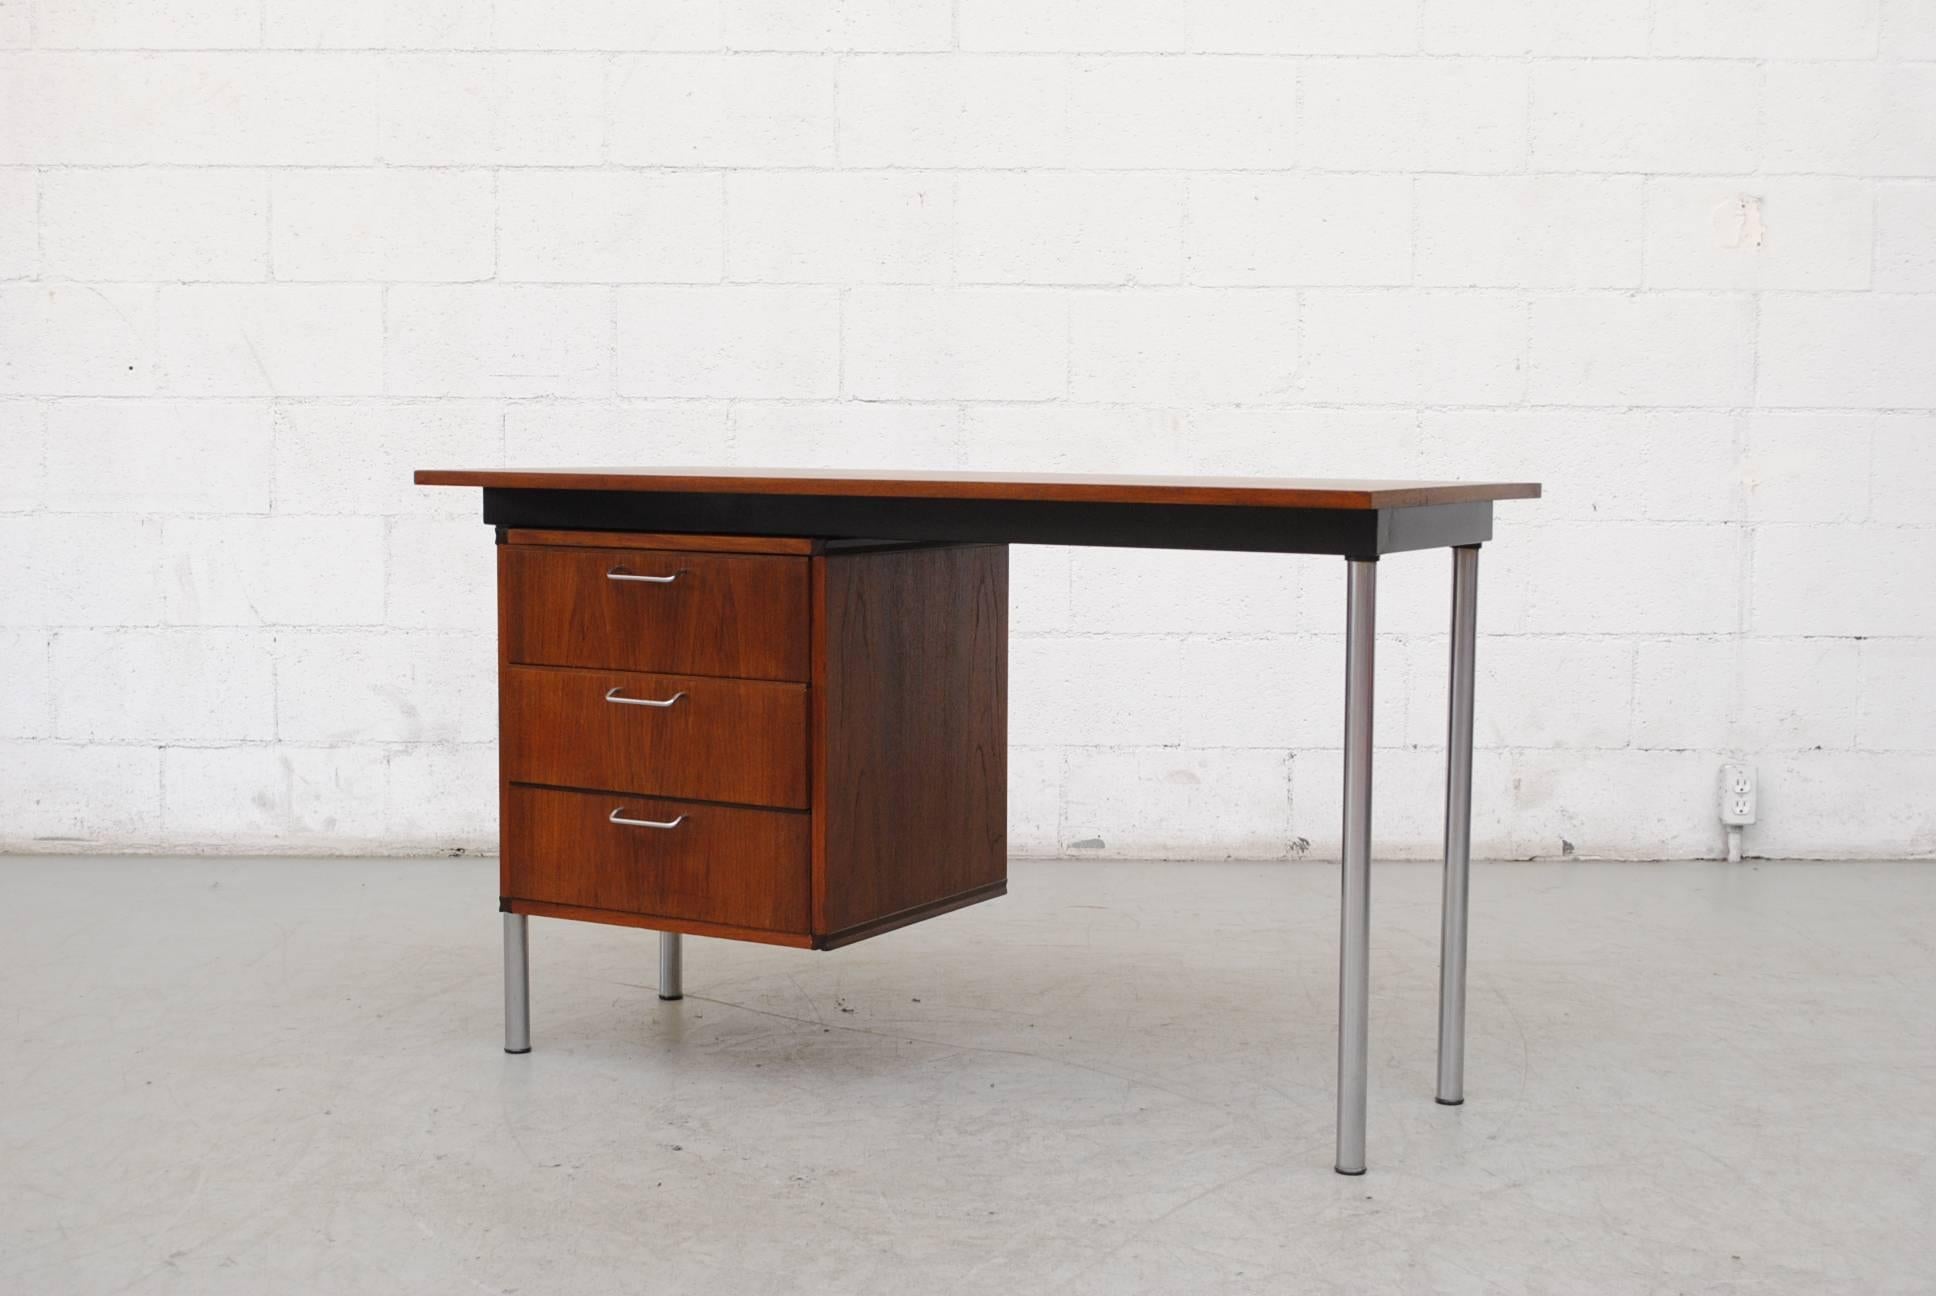 Lightly refinished midcentury teak writing desk by Cees Braakman from the made-to-measure series with three sliding drawers. Brushed chrome and pulls and legs. Good original condition.